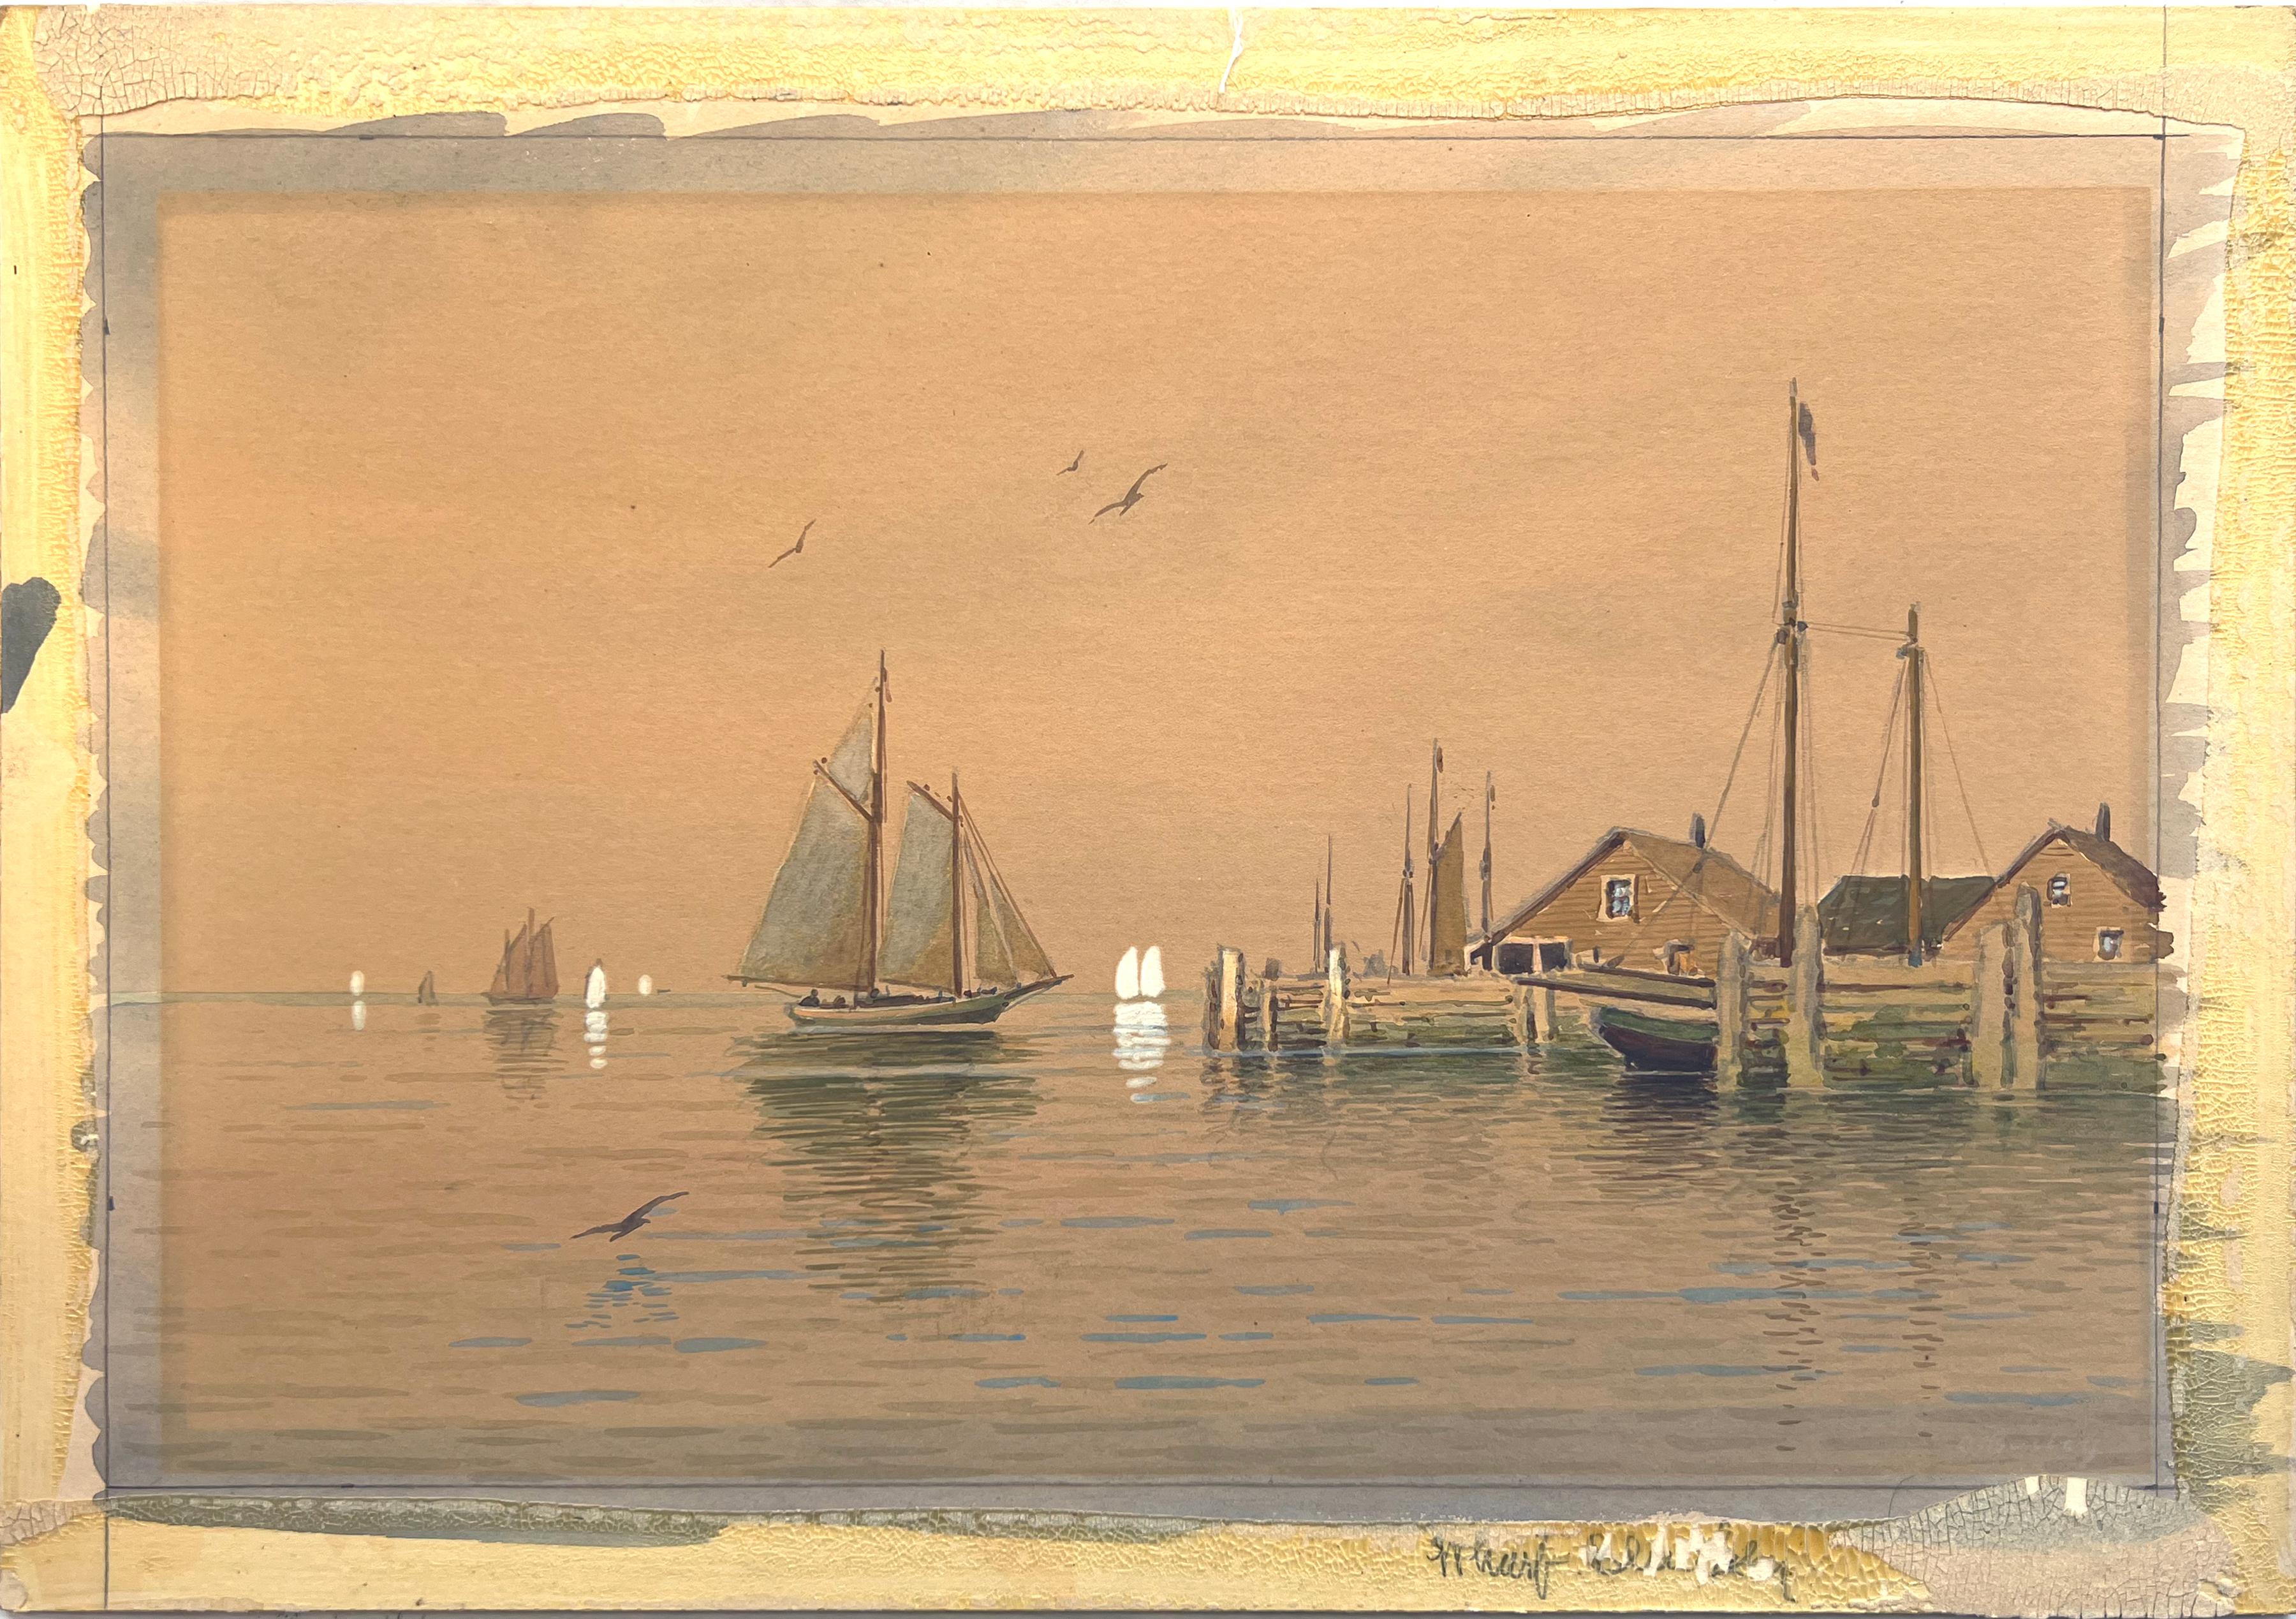 Gloucester Harbor Docking the Boat 1900 Two Masted Schooner - American Impressionist Art by C Bailey